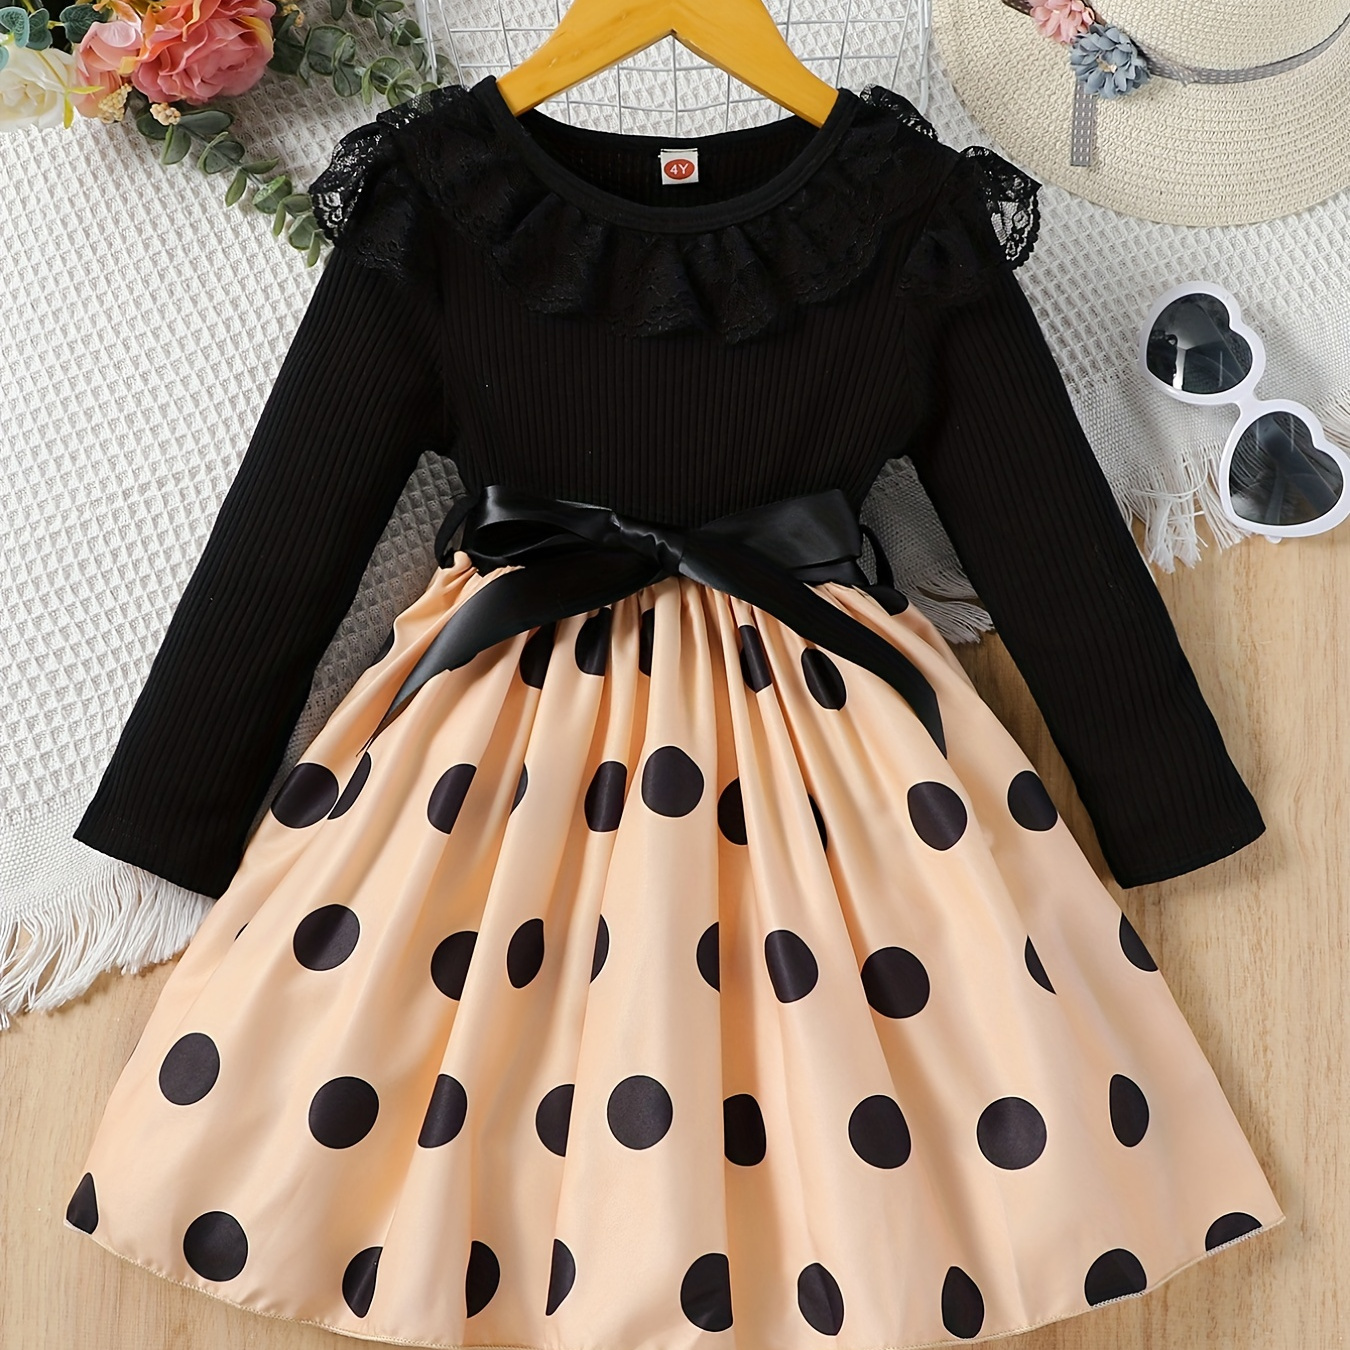 

Toddler Girls Polka Dot Graphic Lace Trim Neck Spliced Princess Belted Dress For Party Beach Vacation Kids Spring Summer Clothes